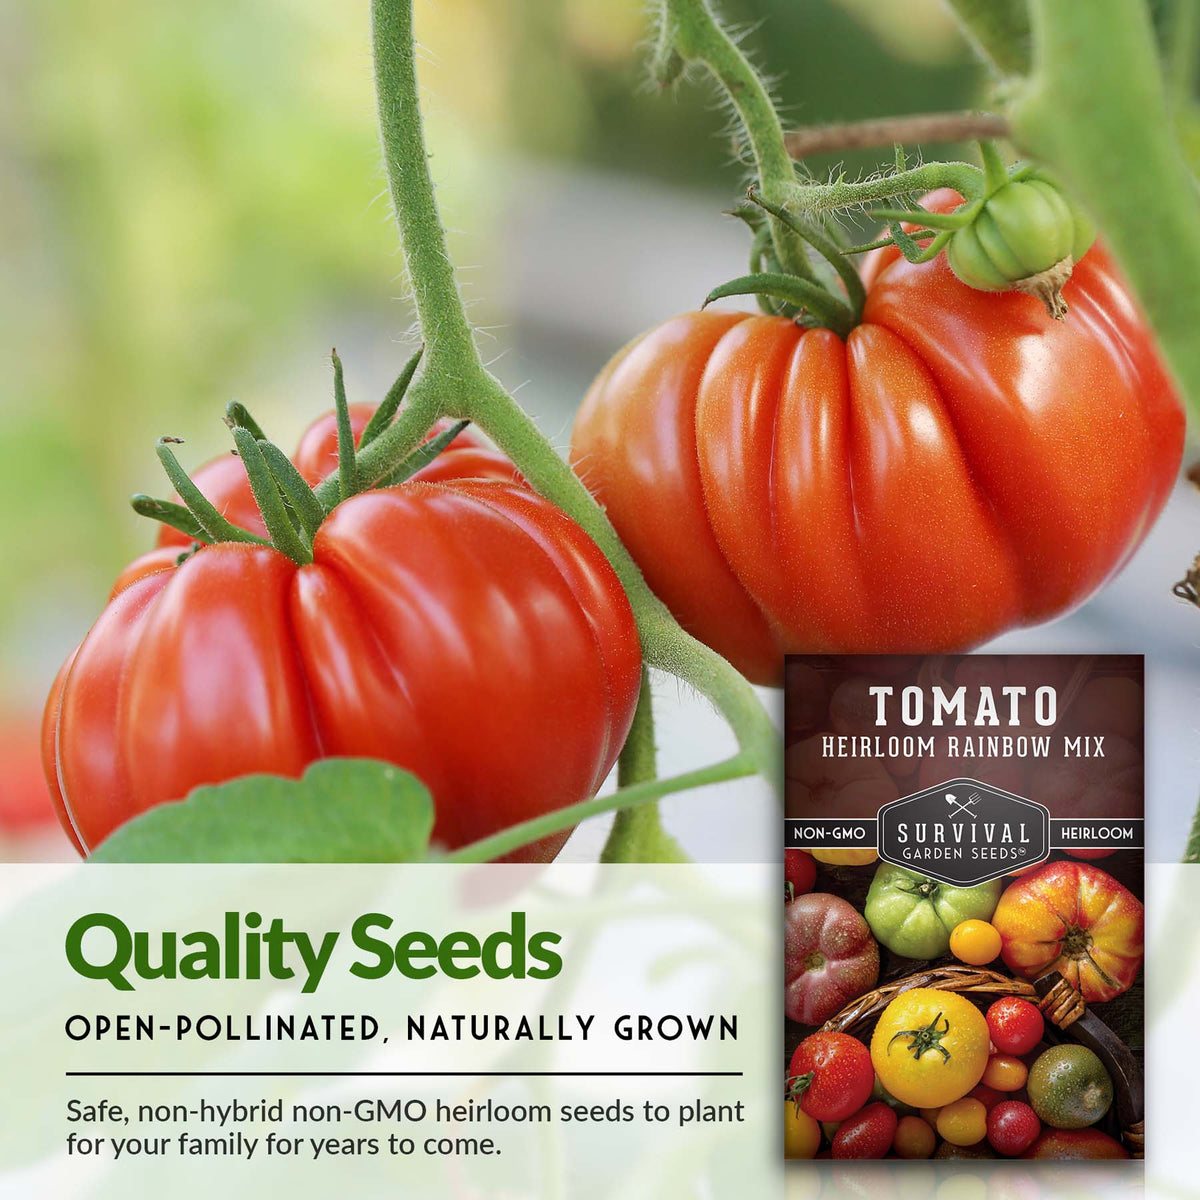 Heirloom tomato seeds are open pollinated and high quality